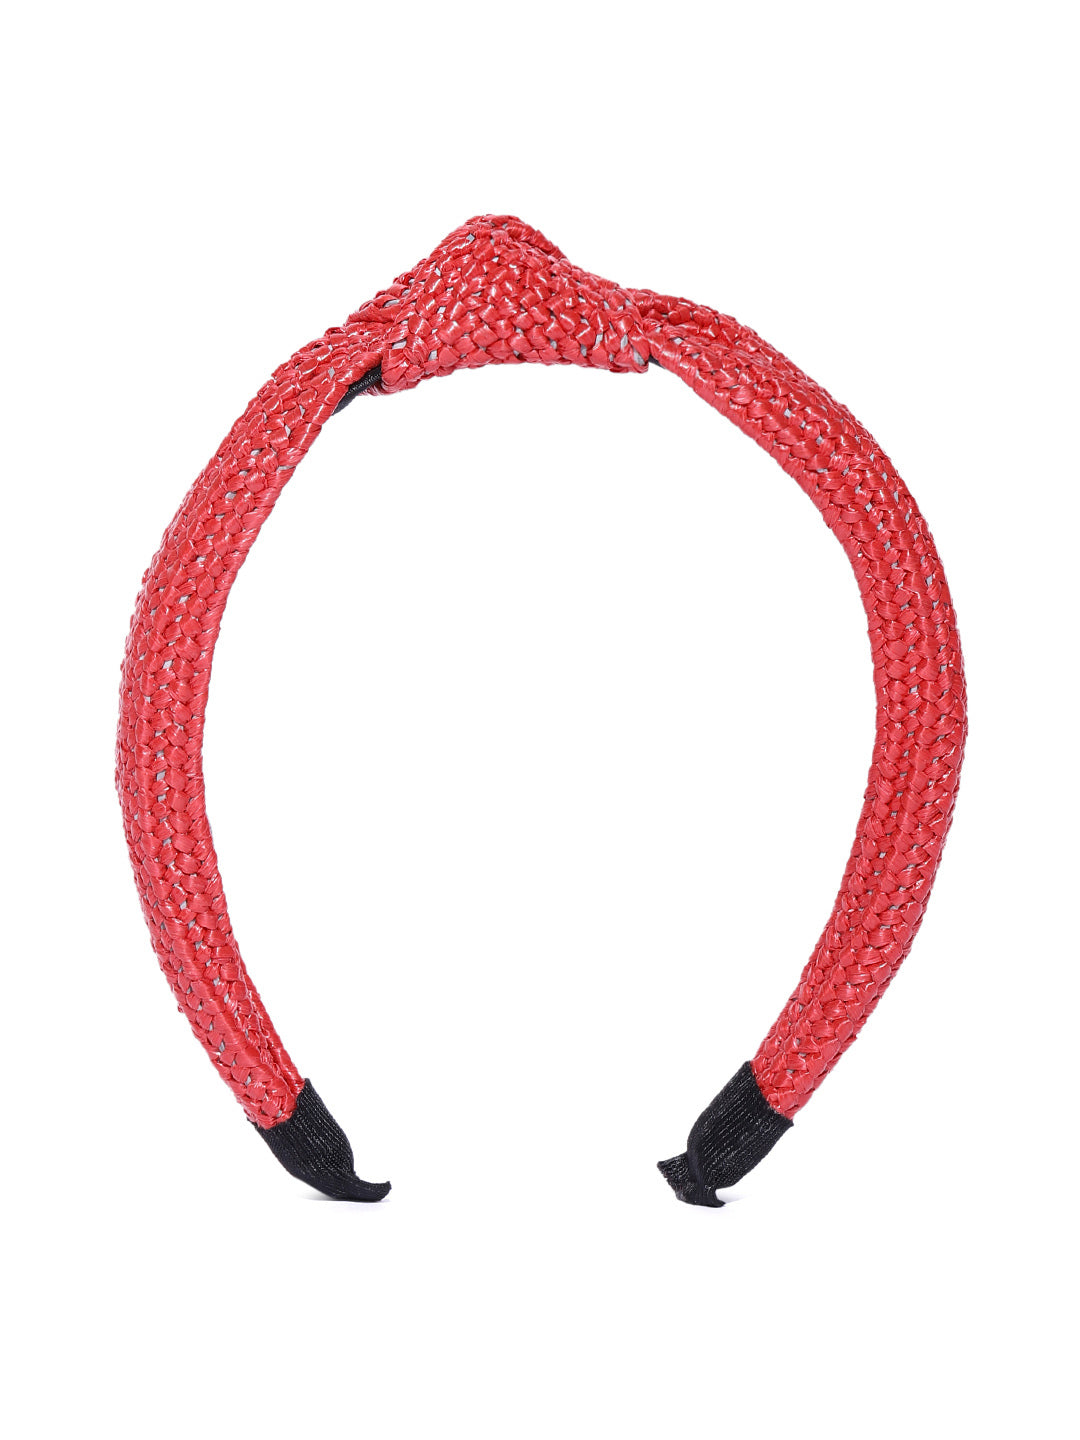 Blueberry red jute knot hair band